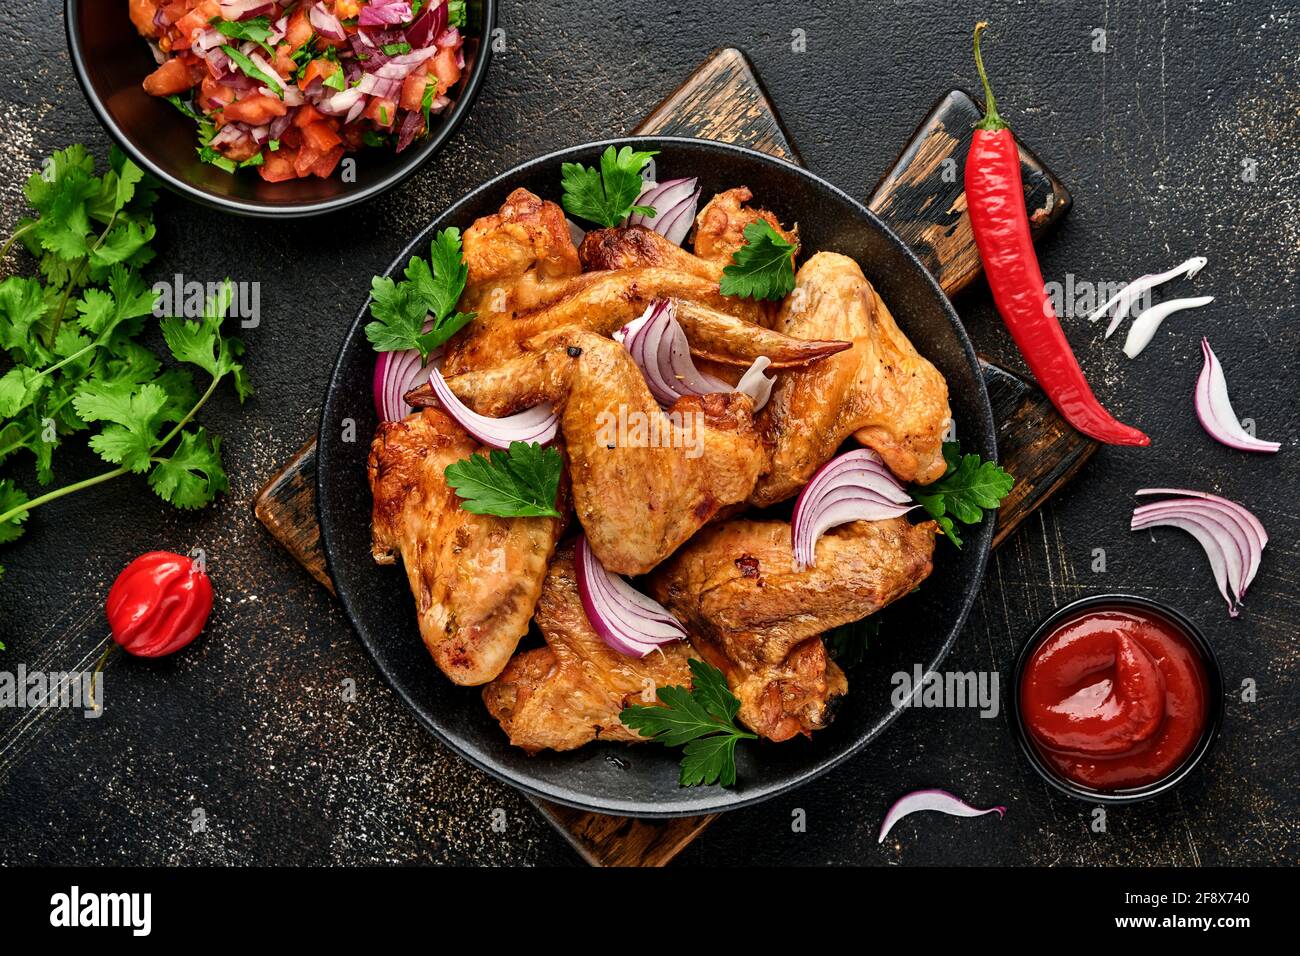 Grilled chicken wings or roasted bbq with spices and tomato salsa sauce on a black plate. Top view with copy space. Stock Photo